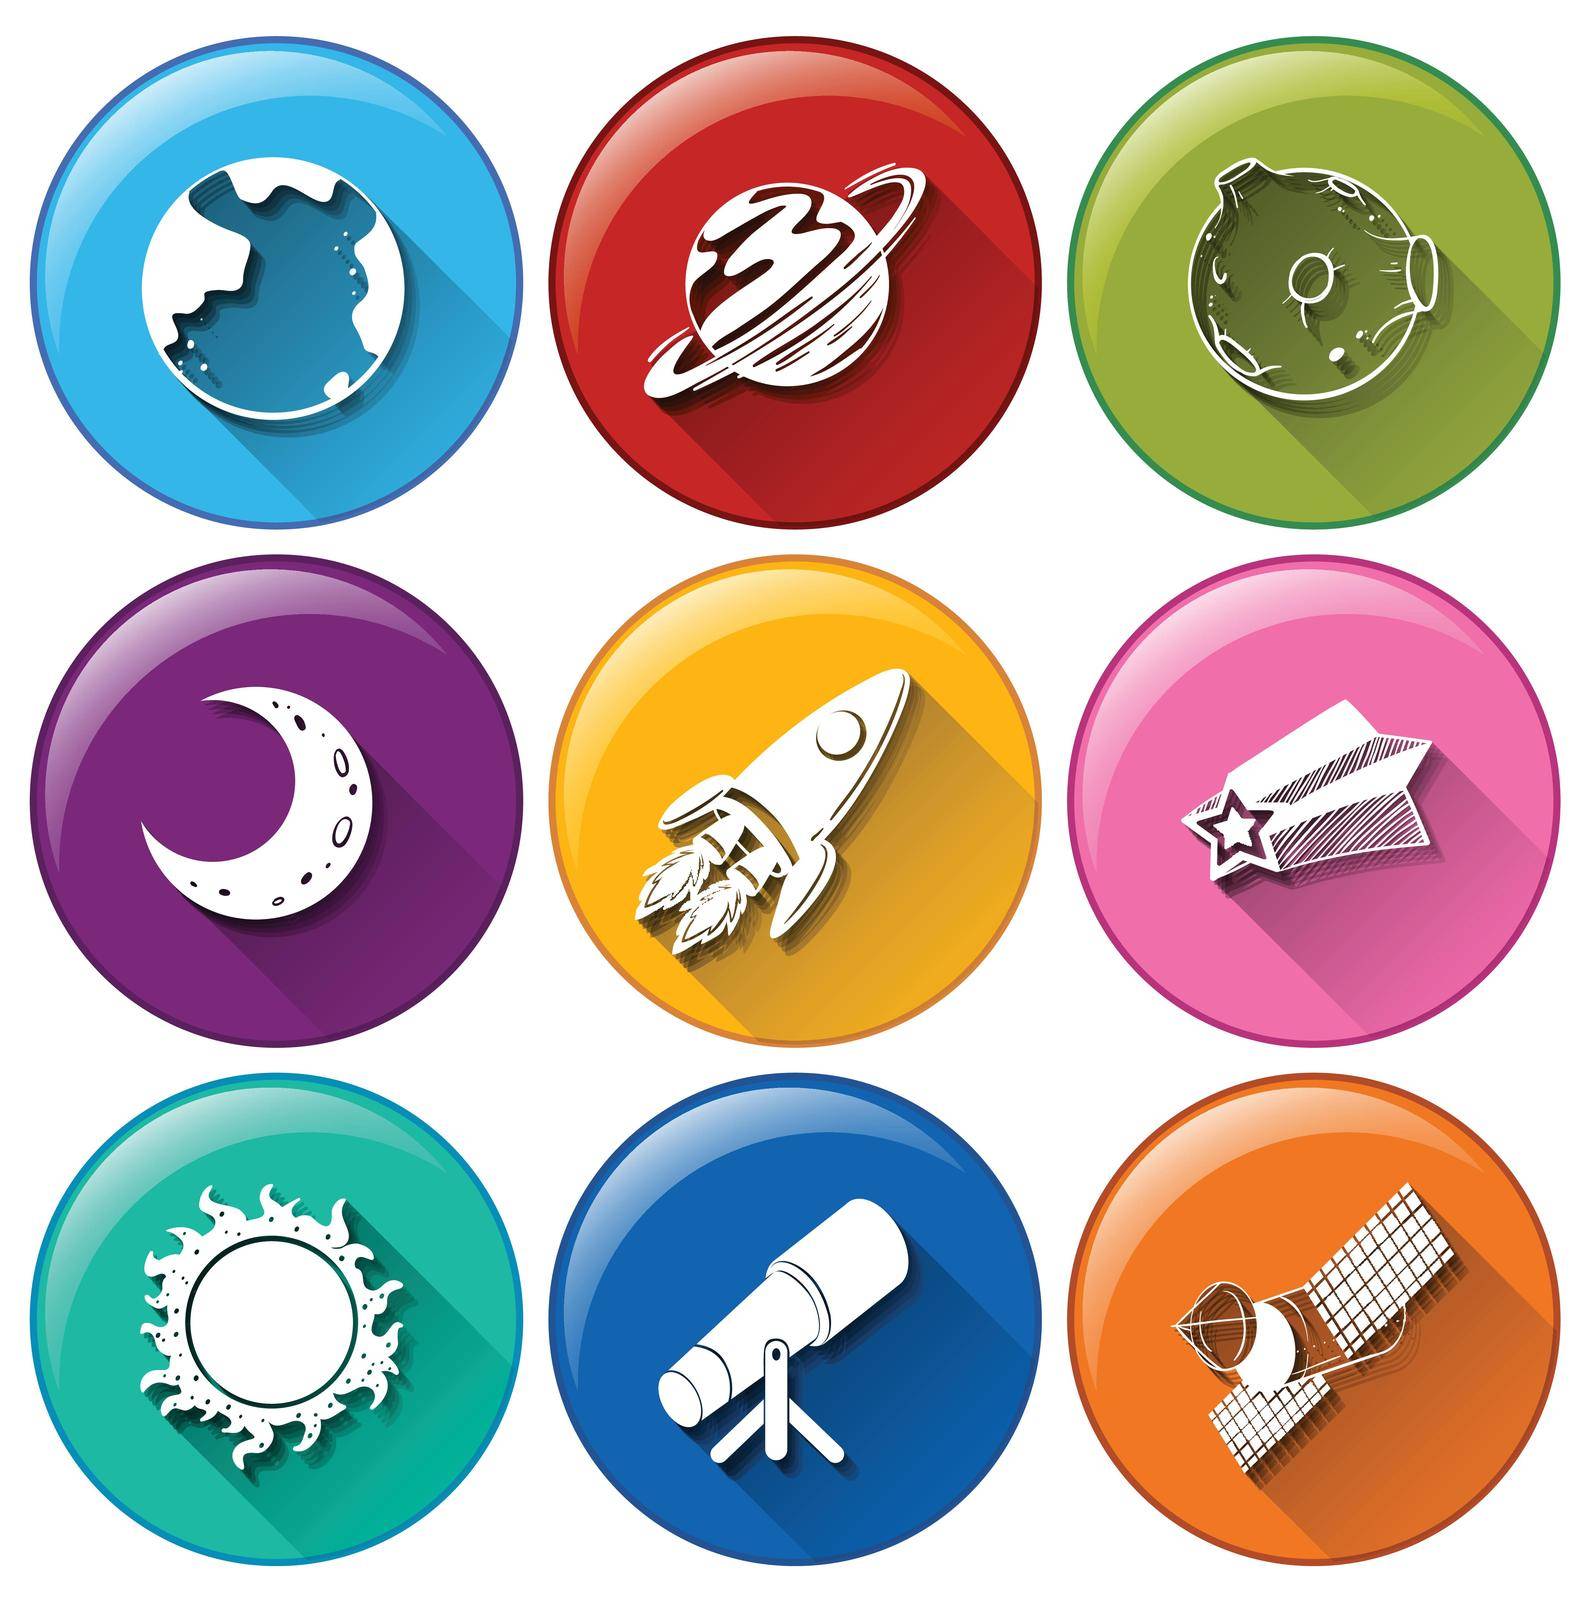 Illustration of the round icons with things in the outerspace on a white background